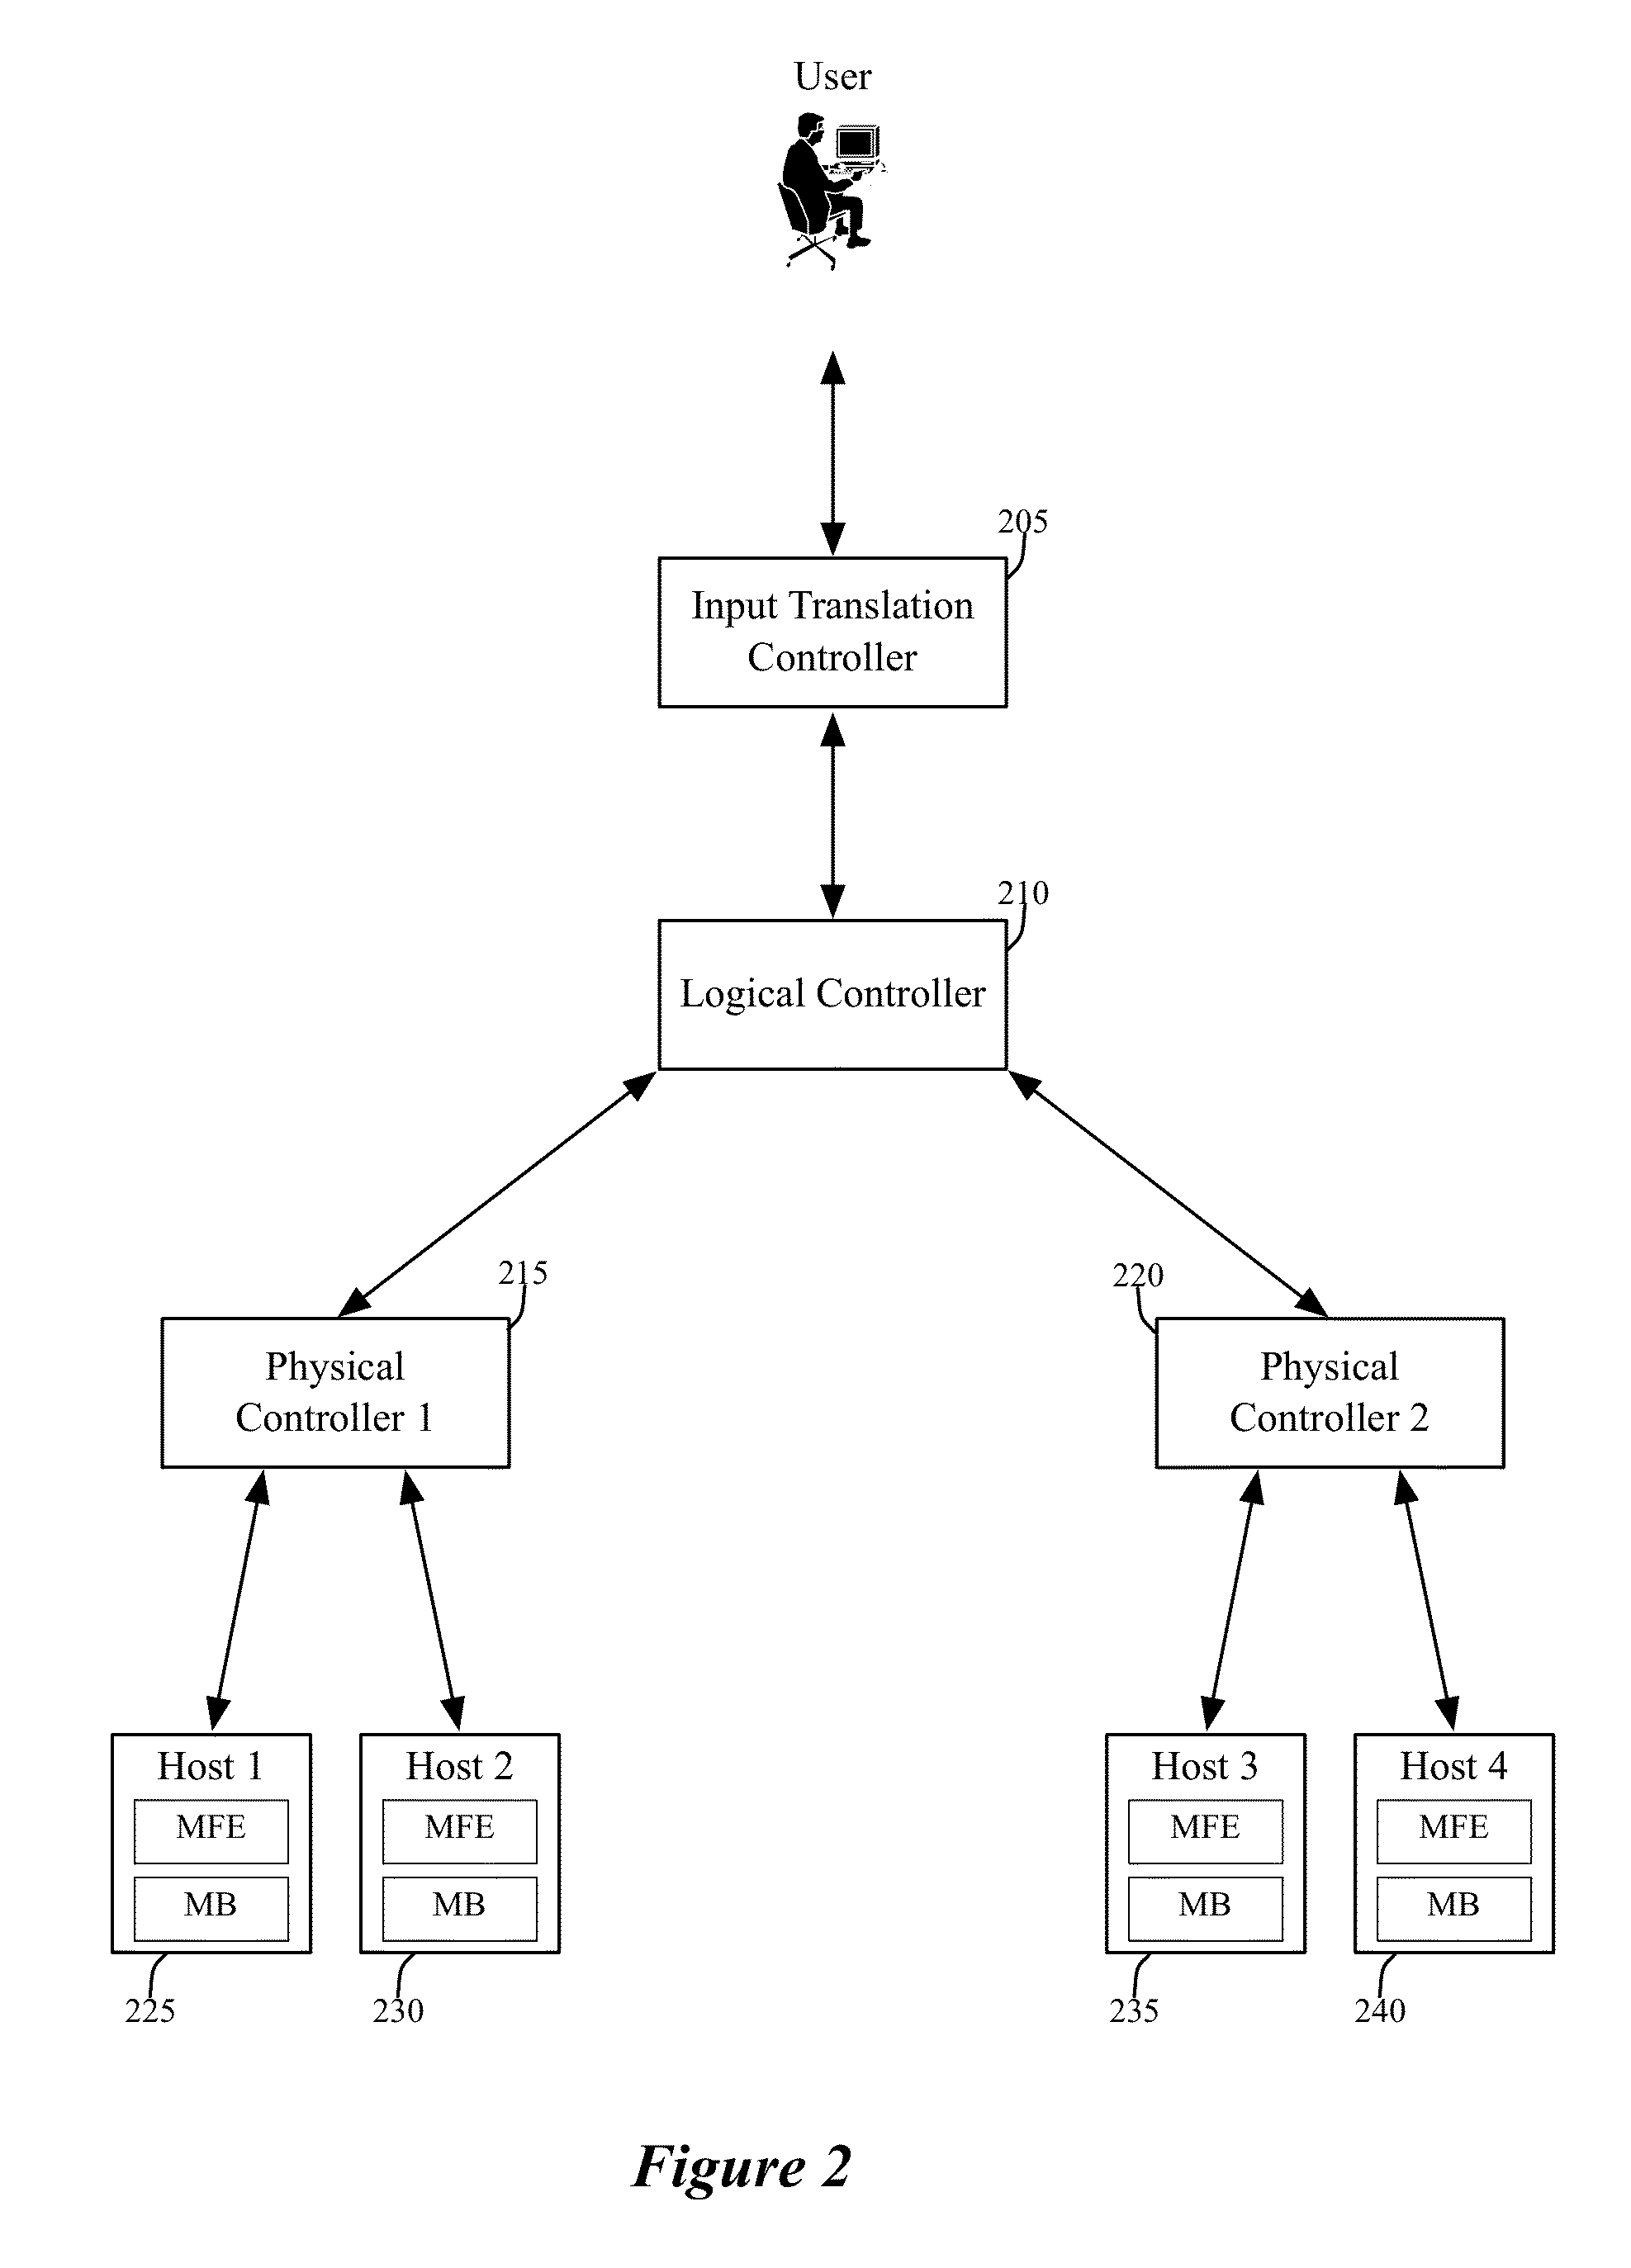 Dynamic Generation of Flow Entries for Last-Hop Processing